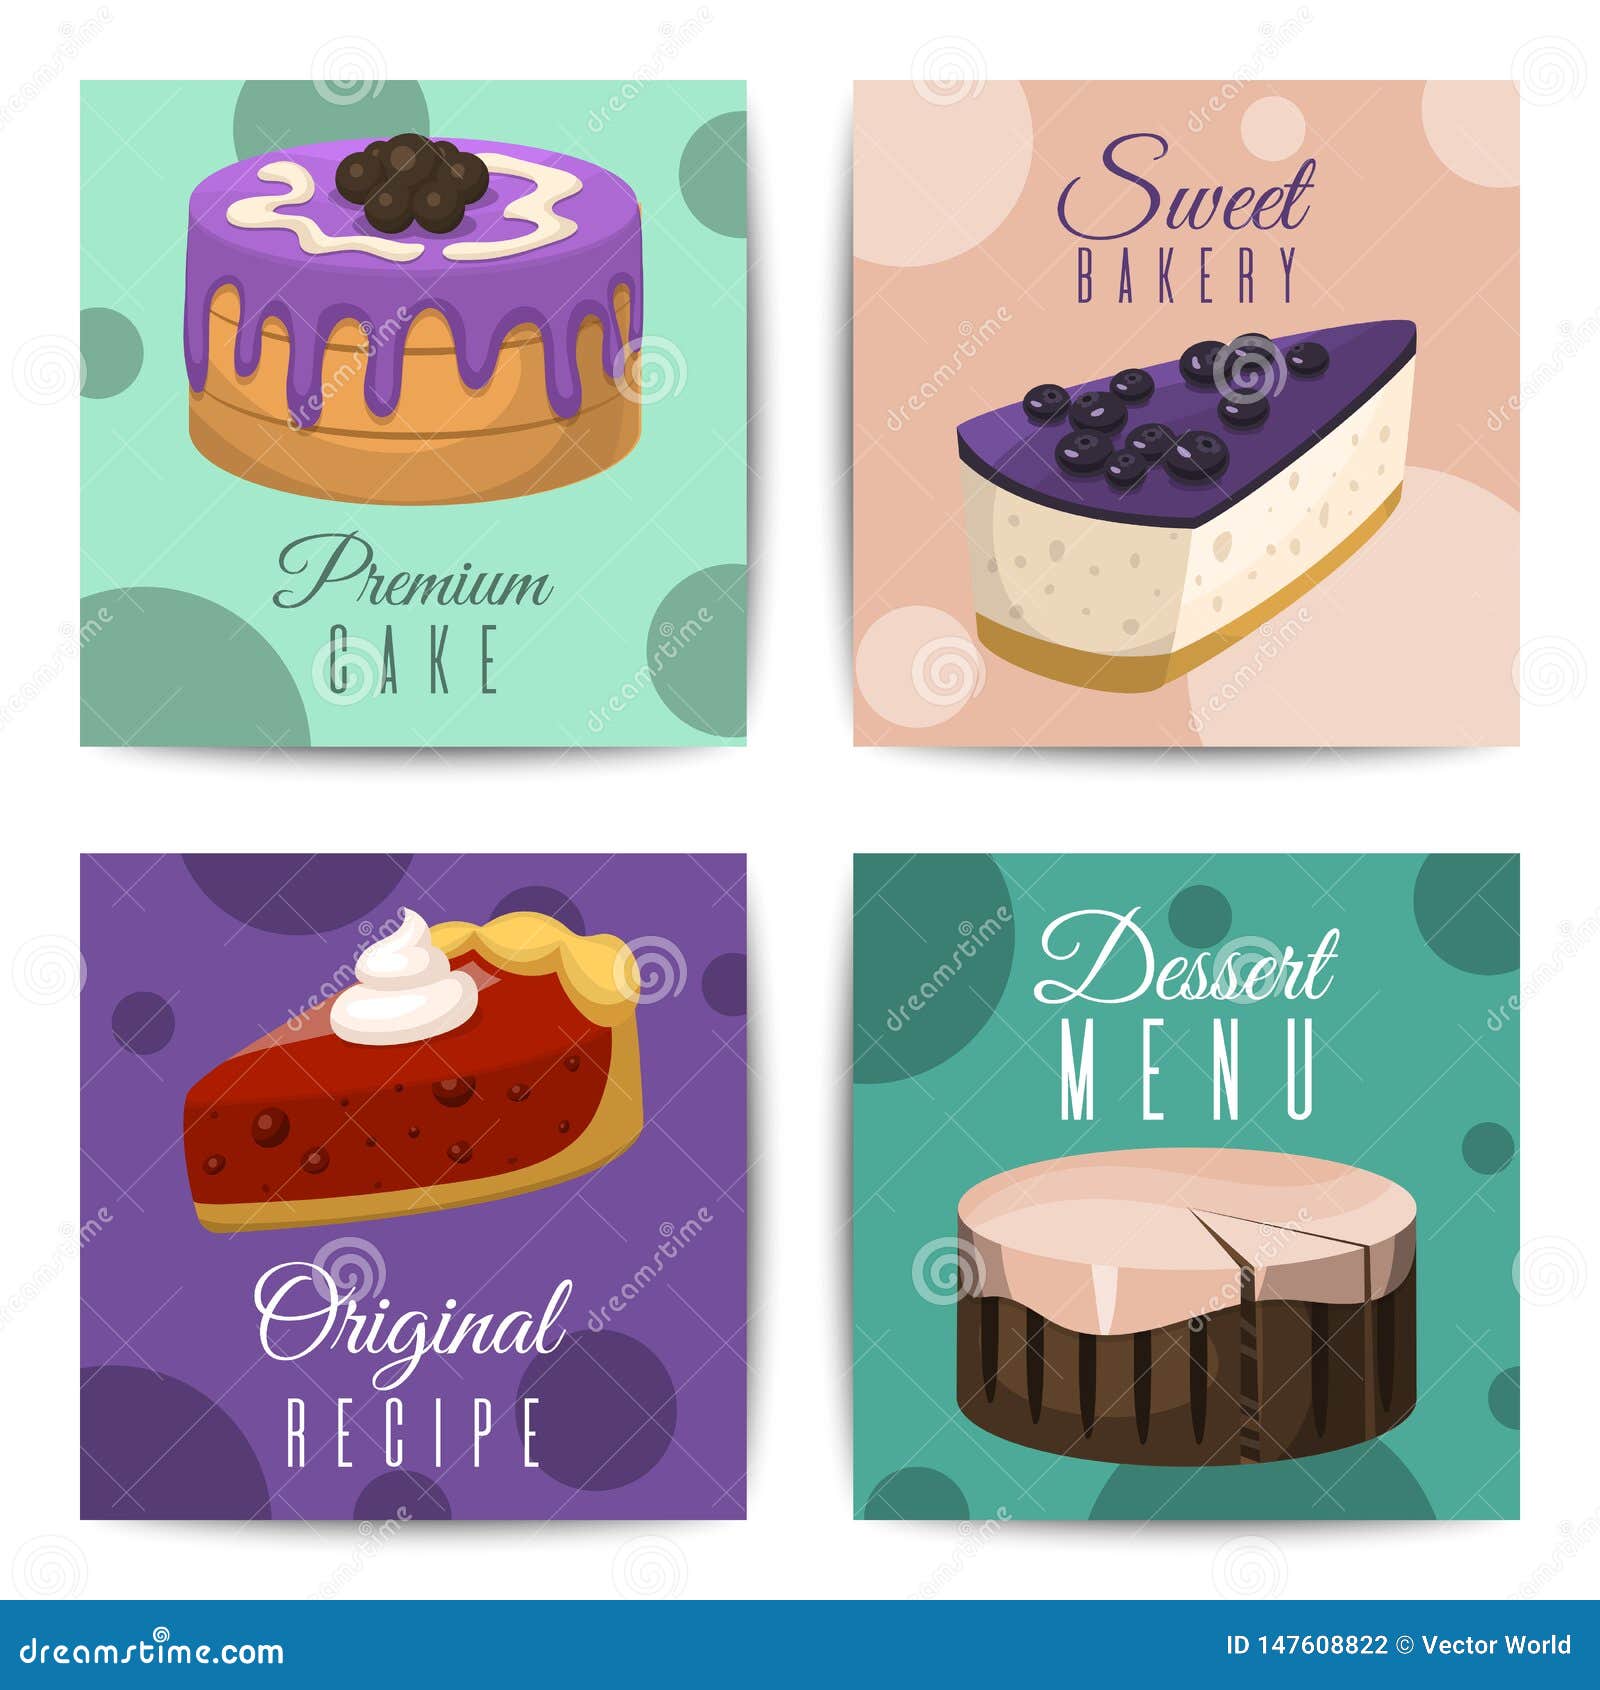 Baking Shop Menu Cards Vector Illustration. Chocolate and Fruity Desserts  for Sweet Cake Shop with Cupcakes, Bakery Stock Vector - Illustration of  chocolate, decoration: 147608822